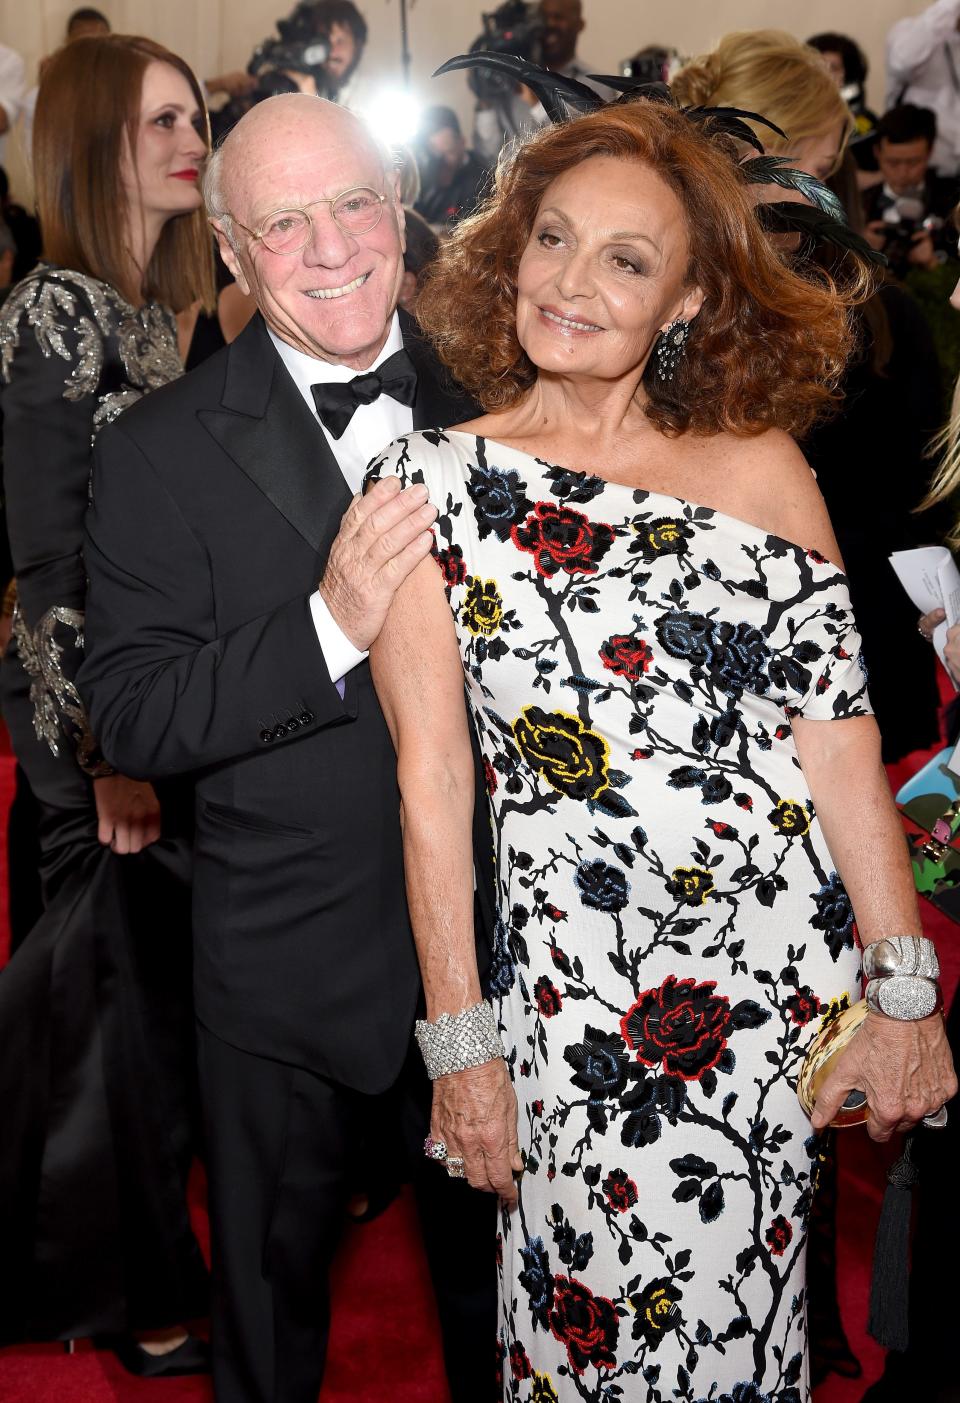 Diane von Furstenberg and her husband, Barry Diller, attend the 2015 Met Gala in New York City.